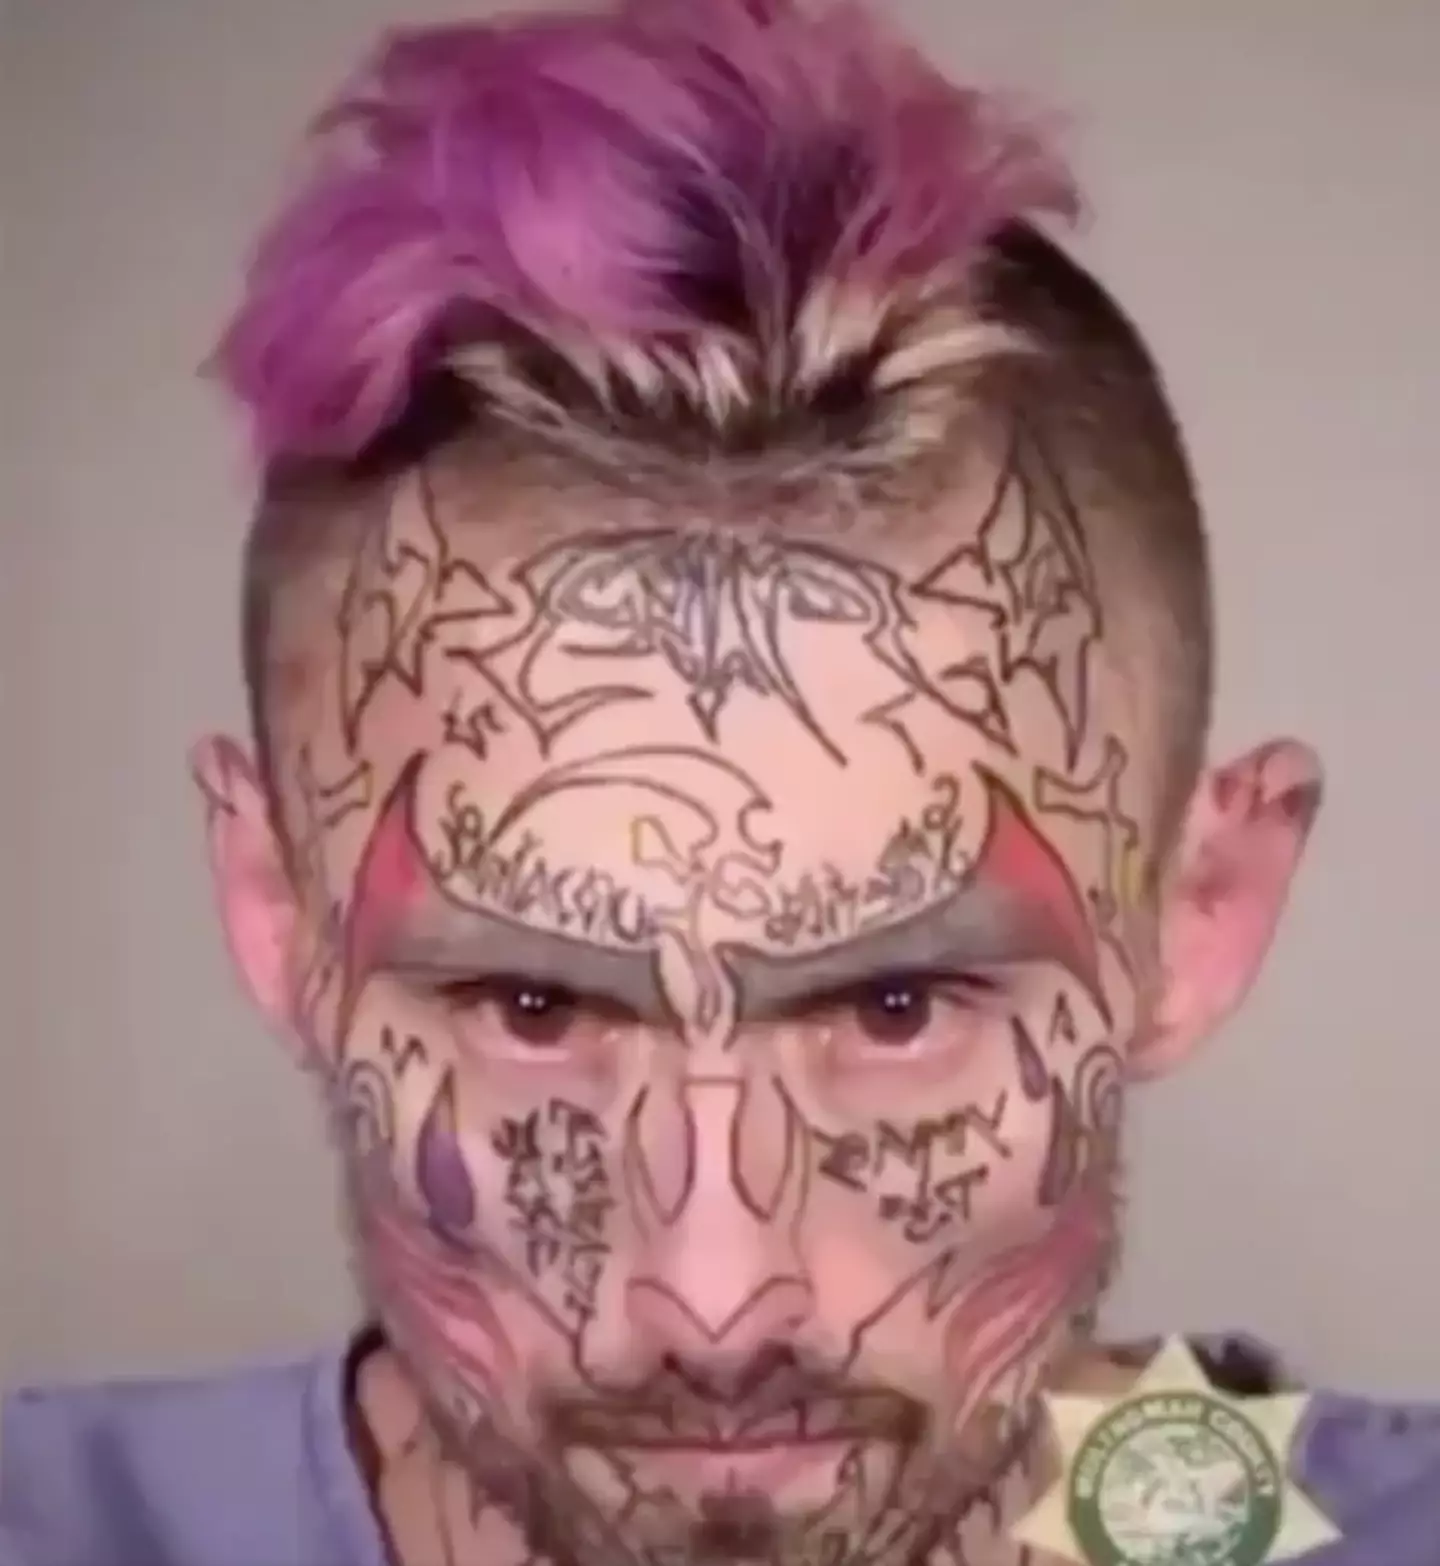 In his final mugshot he has a barrage of face tattoos.